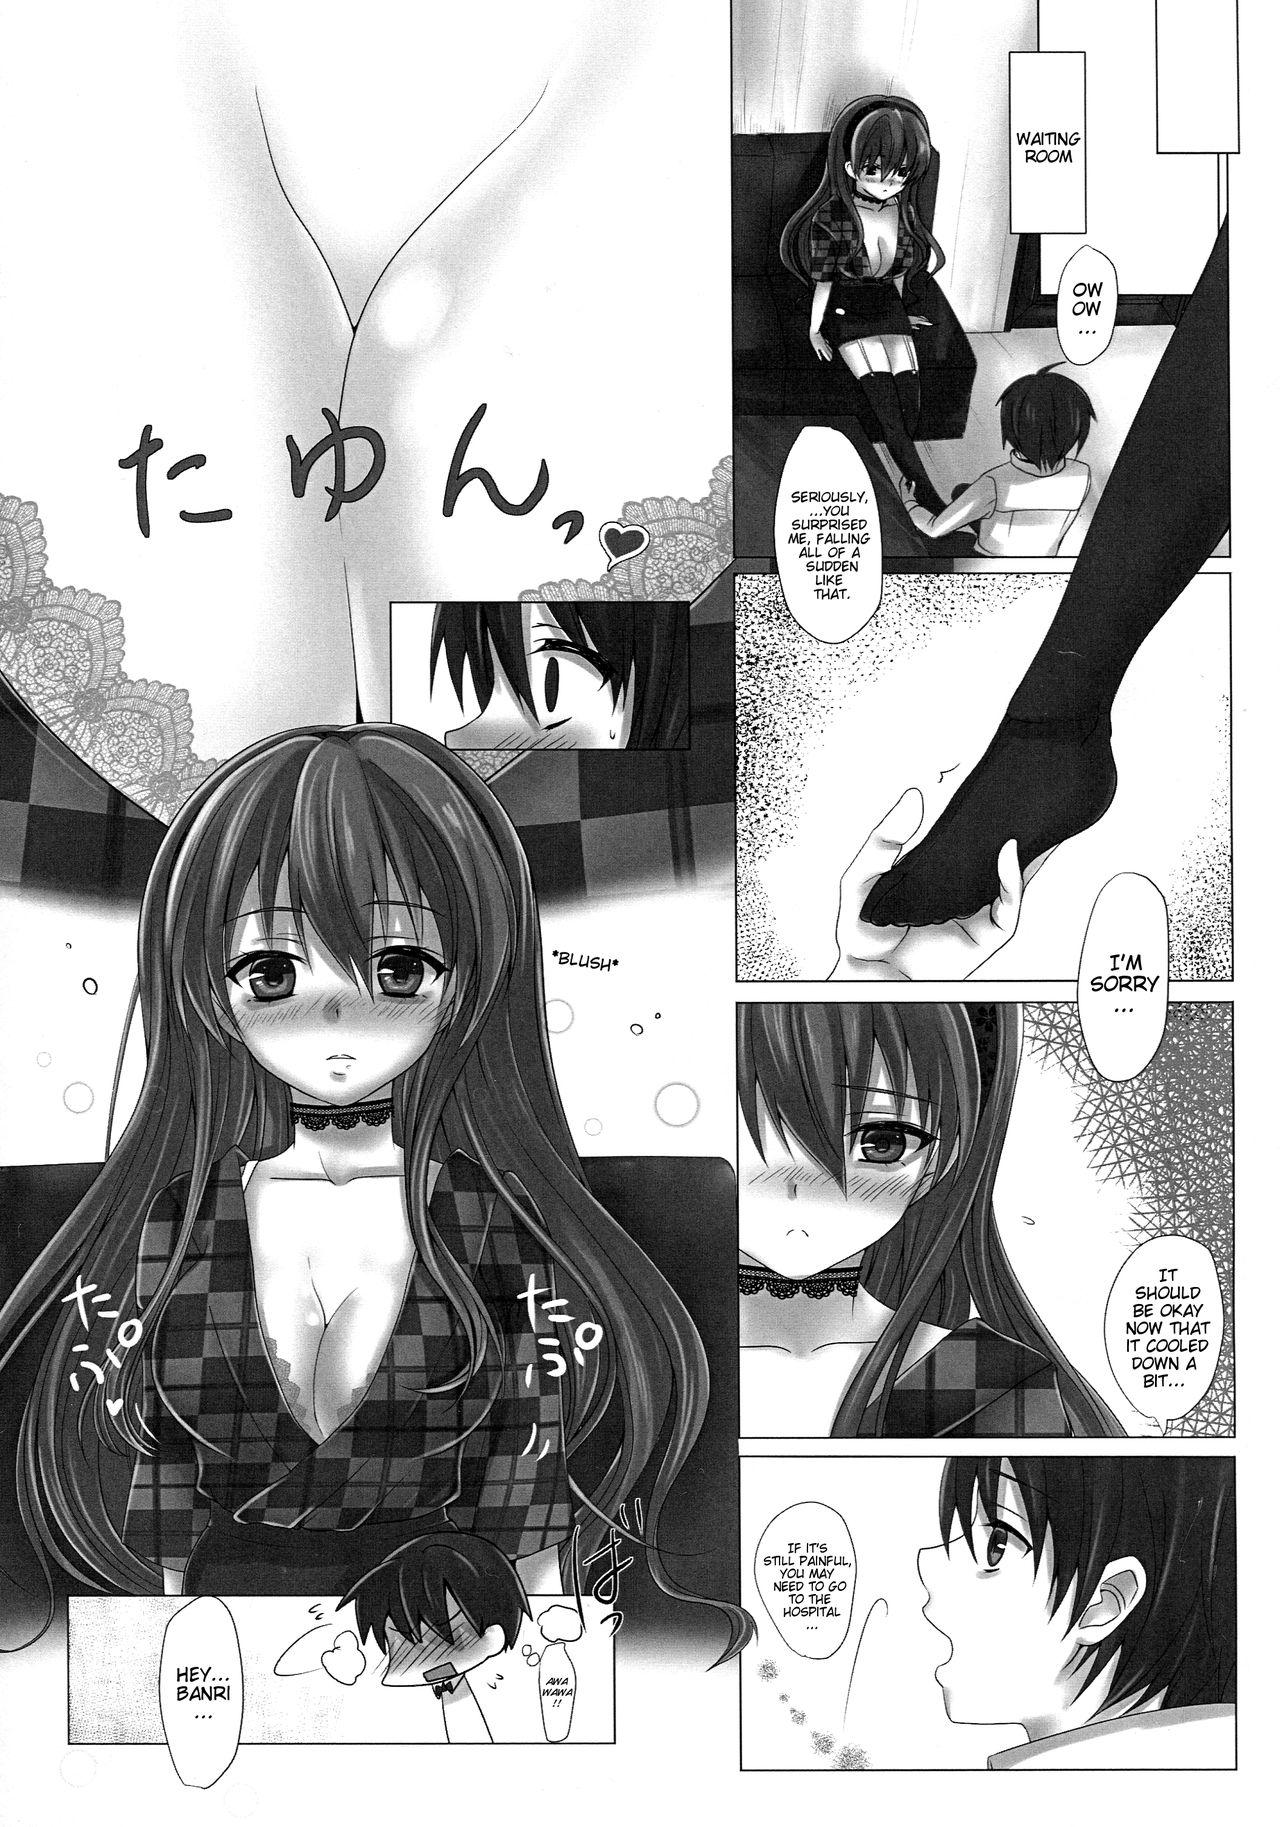 Romance KISS ME TOUCH ME - Golden time Baile - Page 4